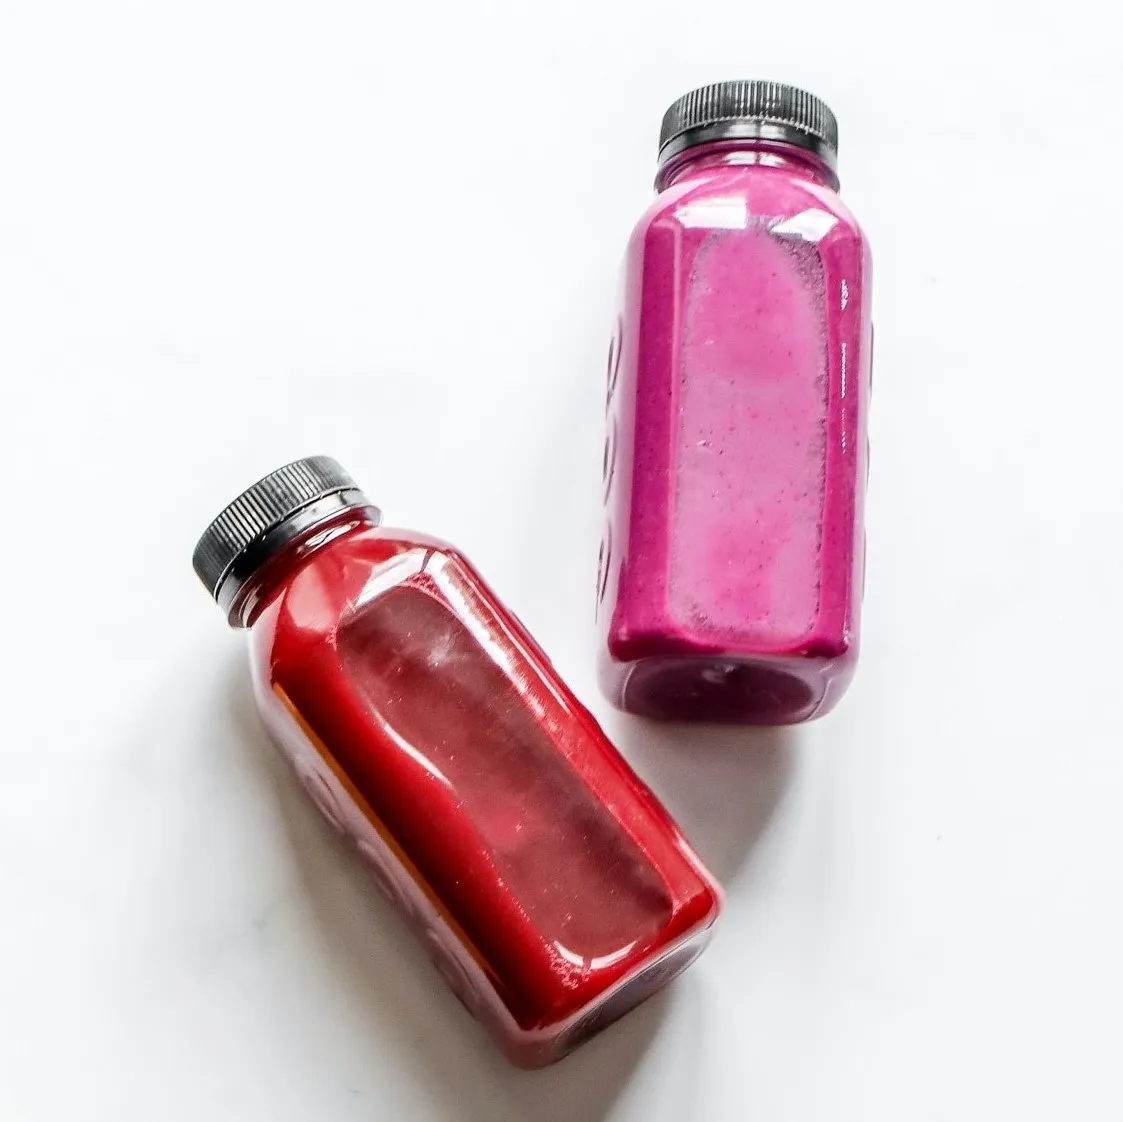 Two unlabelled bottles with pink content lying on a white surface